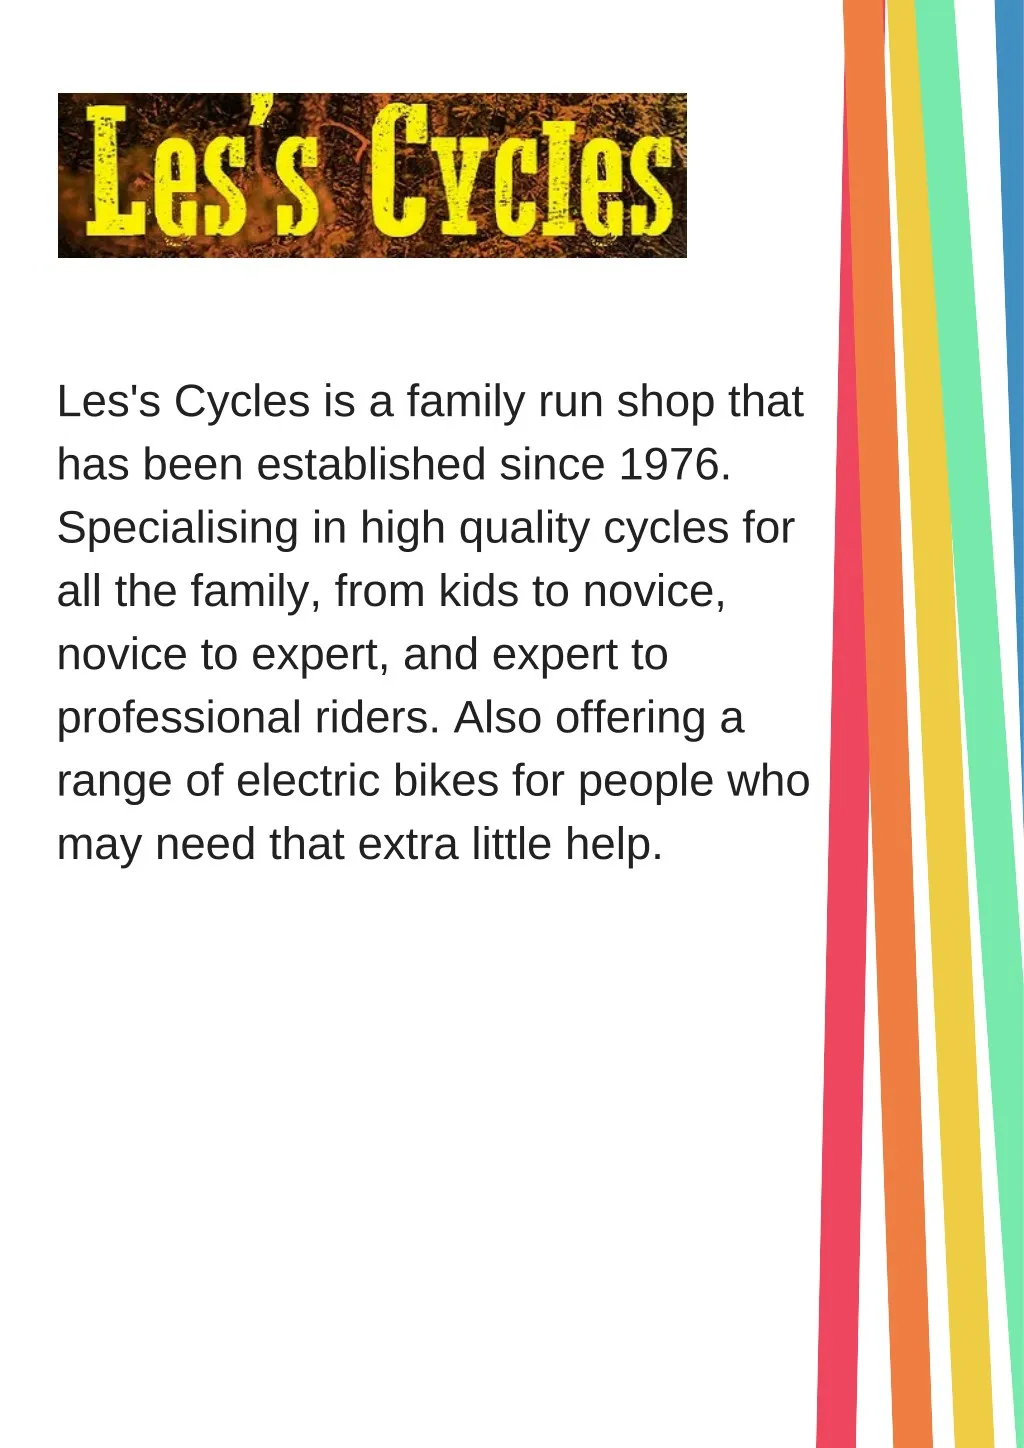 les s cycles is a family run shop that has been